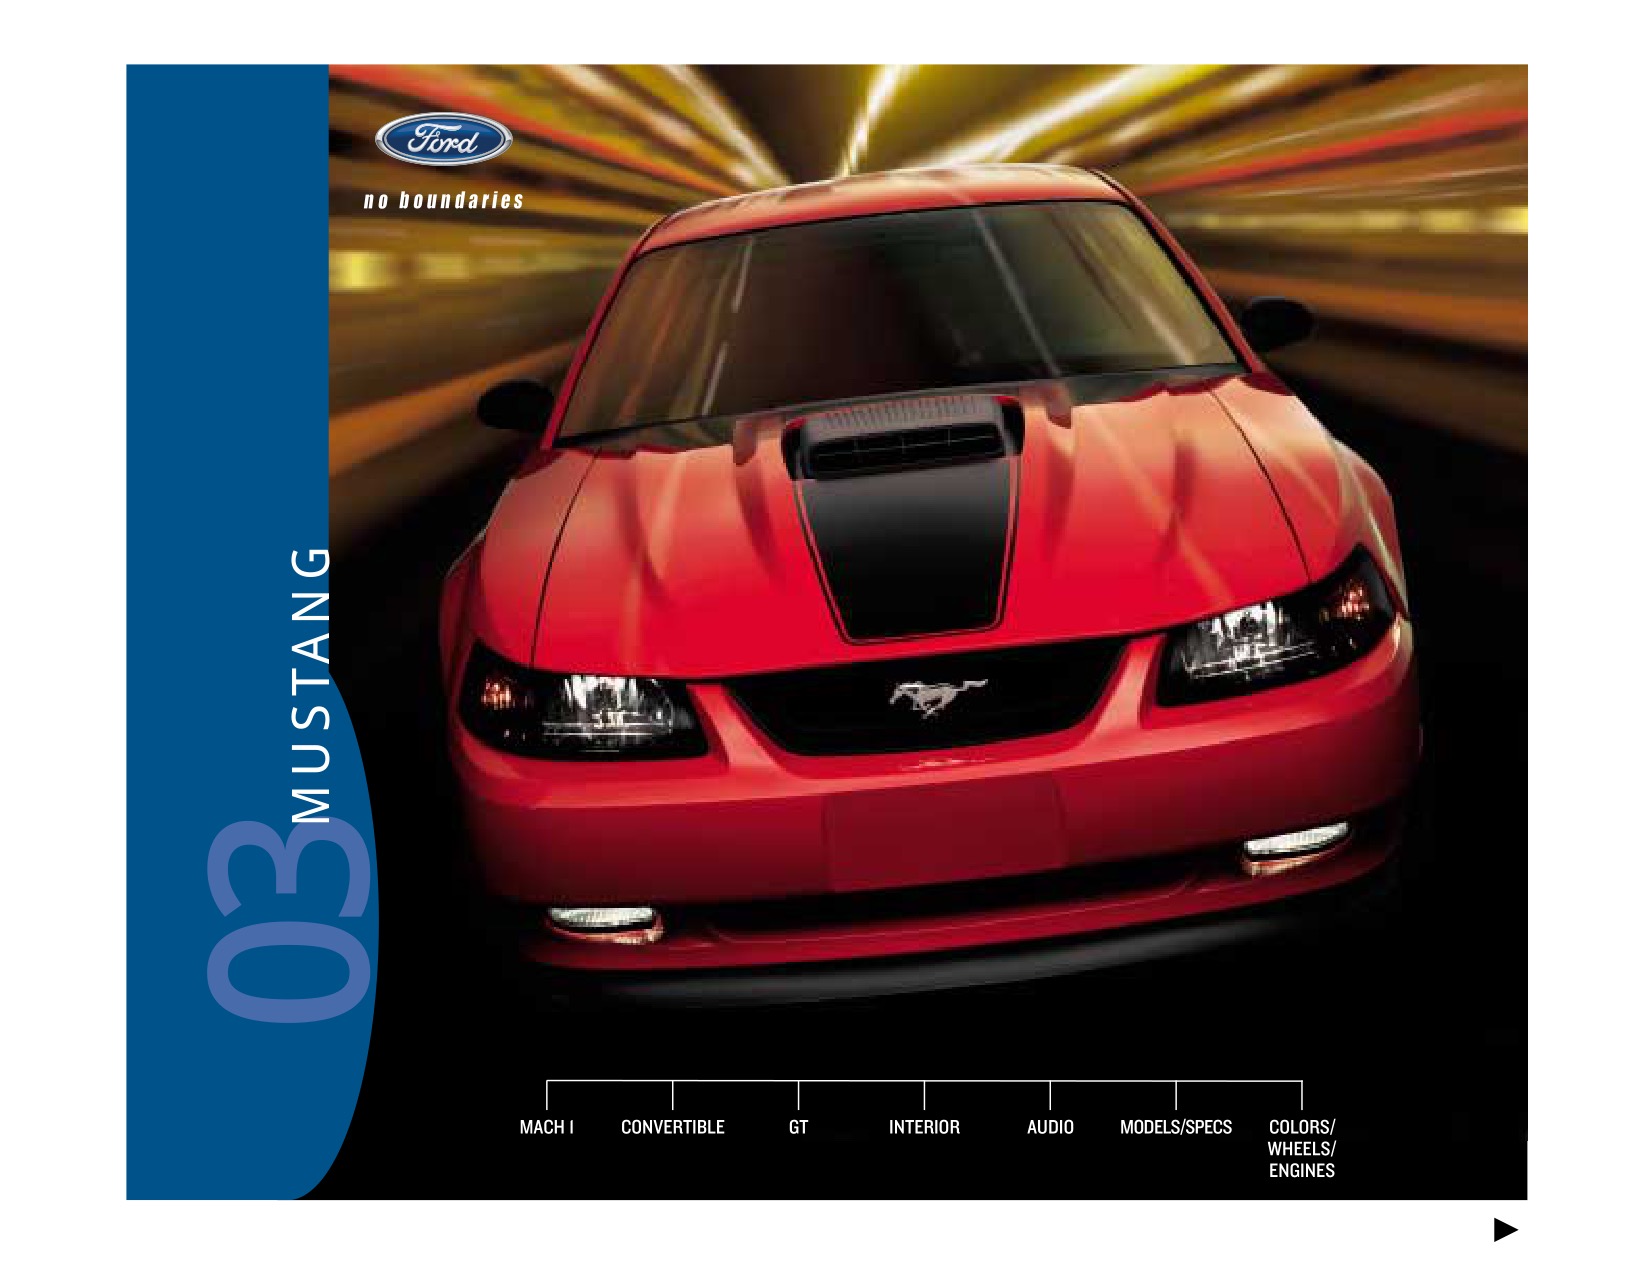 2003 Ford Mustang Brochure Page 1